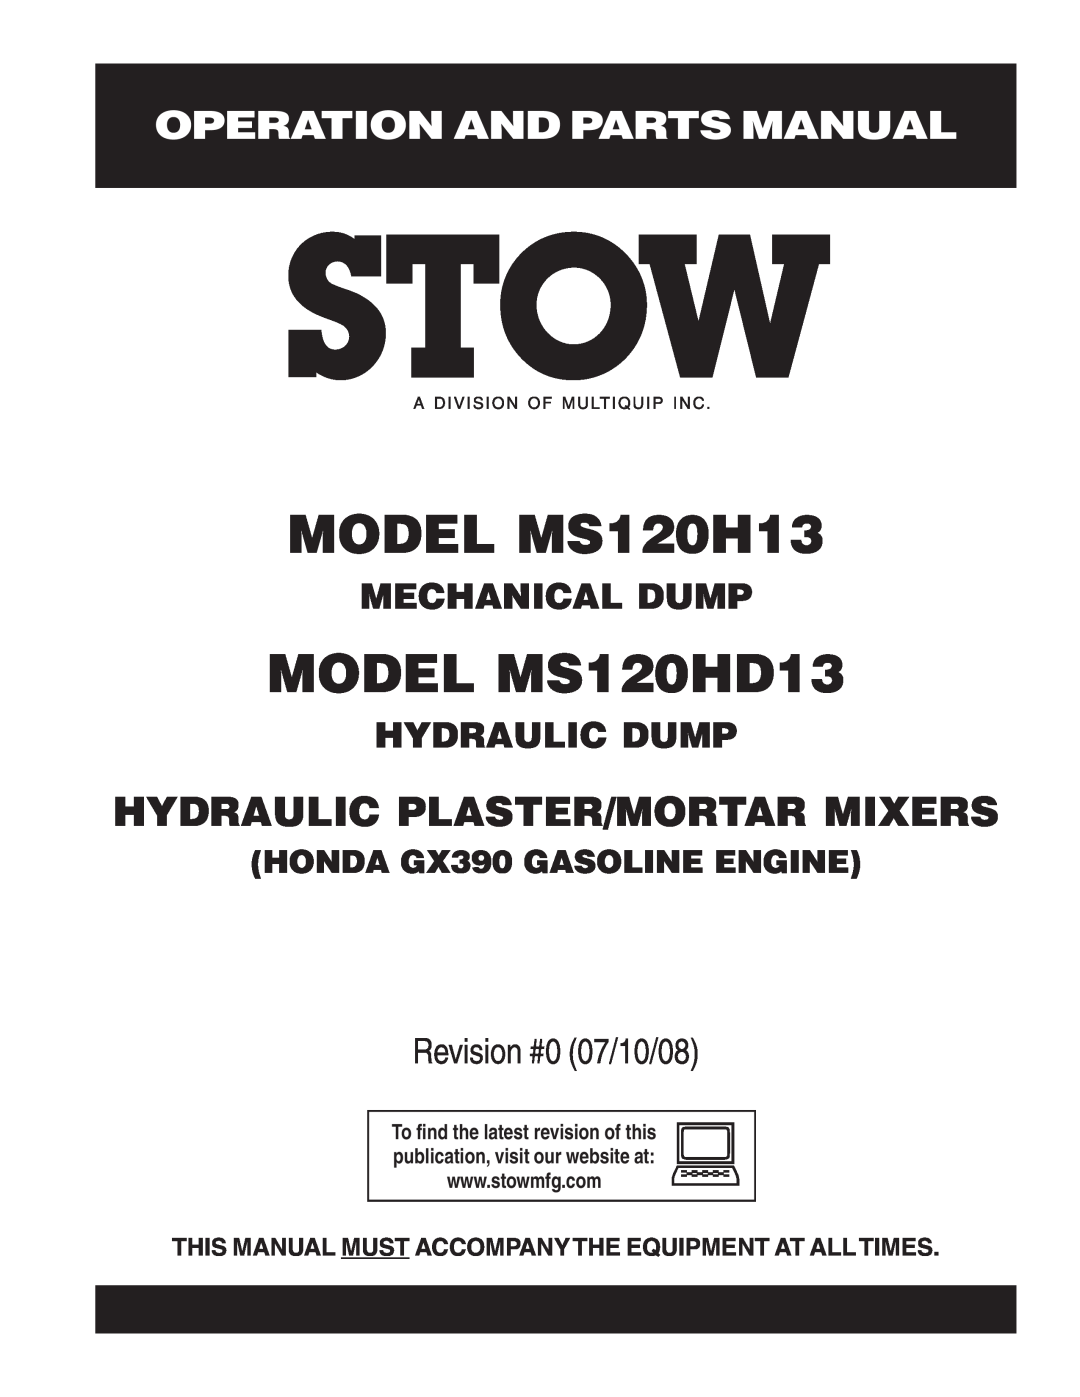 Stow manual Operation And Parts Manual, MODEL MS120H13, MODEL MS120HD13, Hydraulic Plaster/Mortar Mixers 